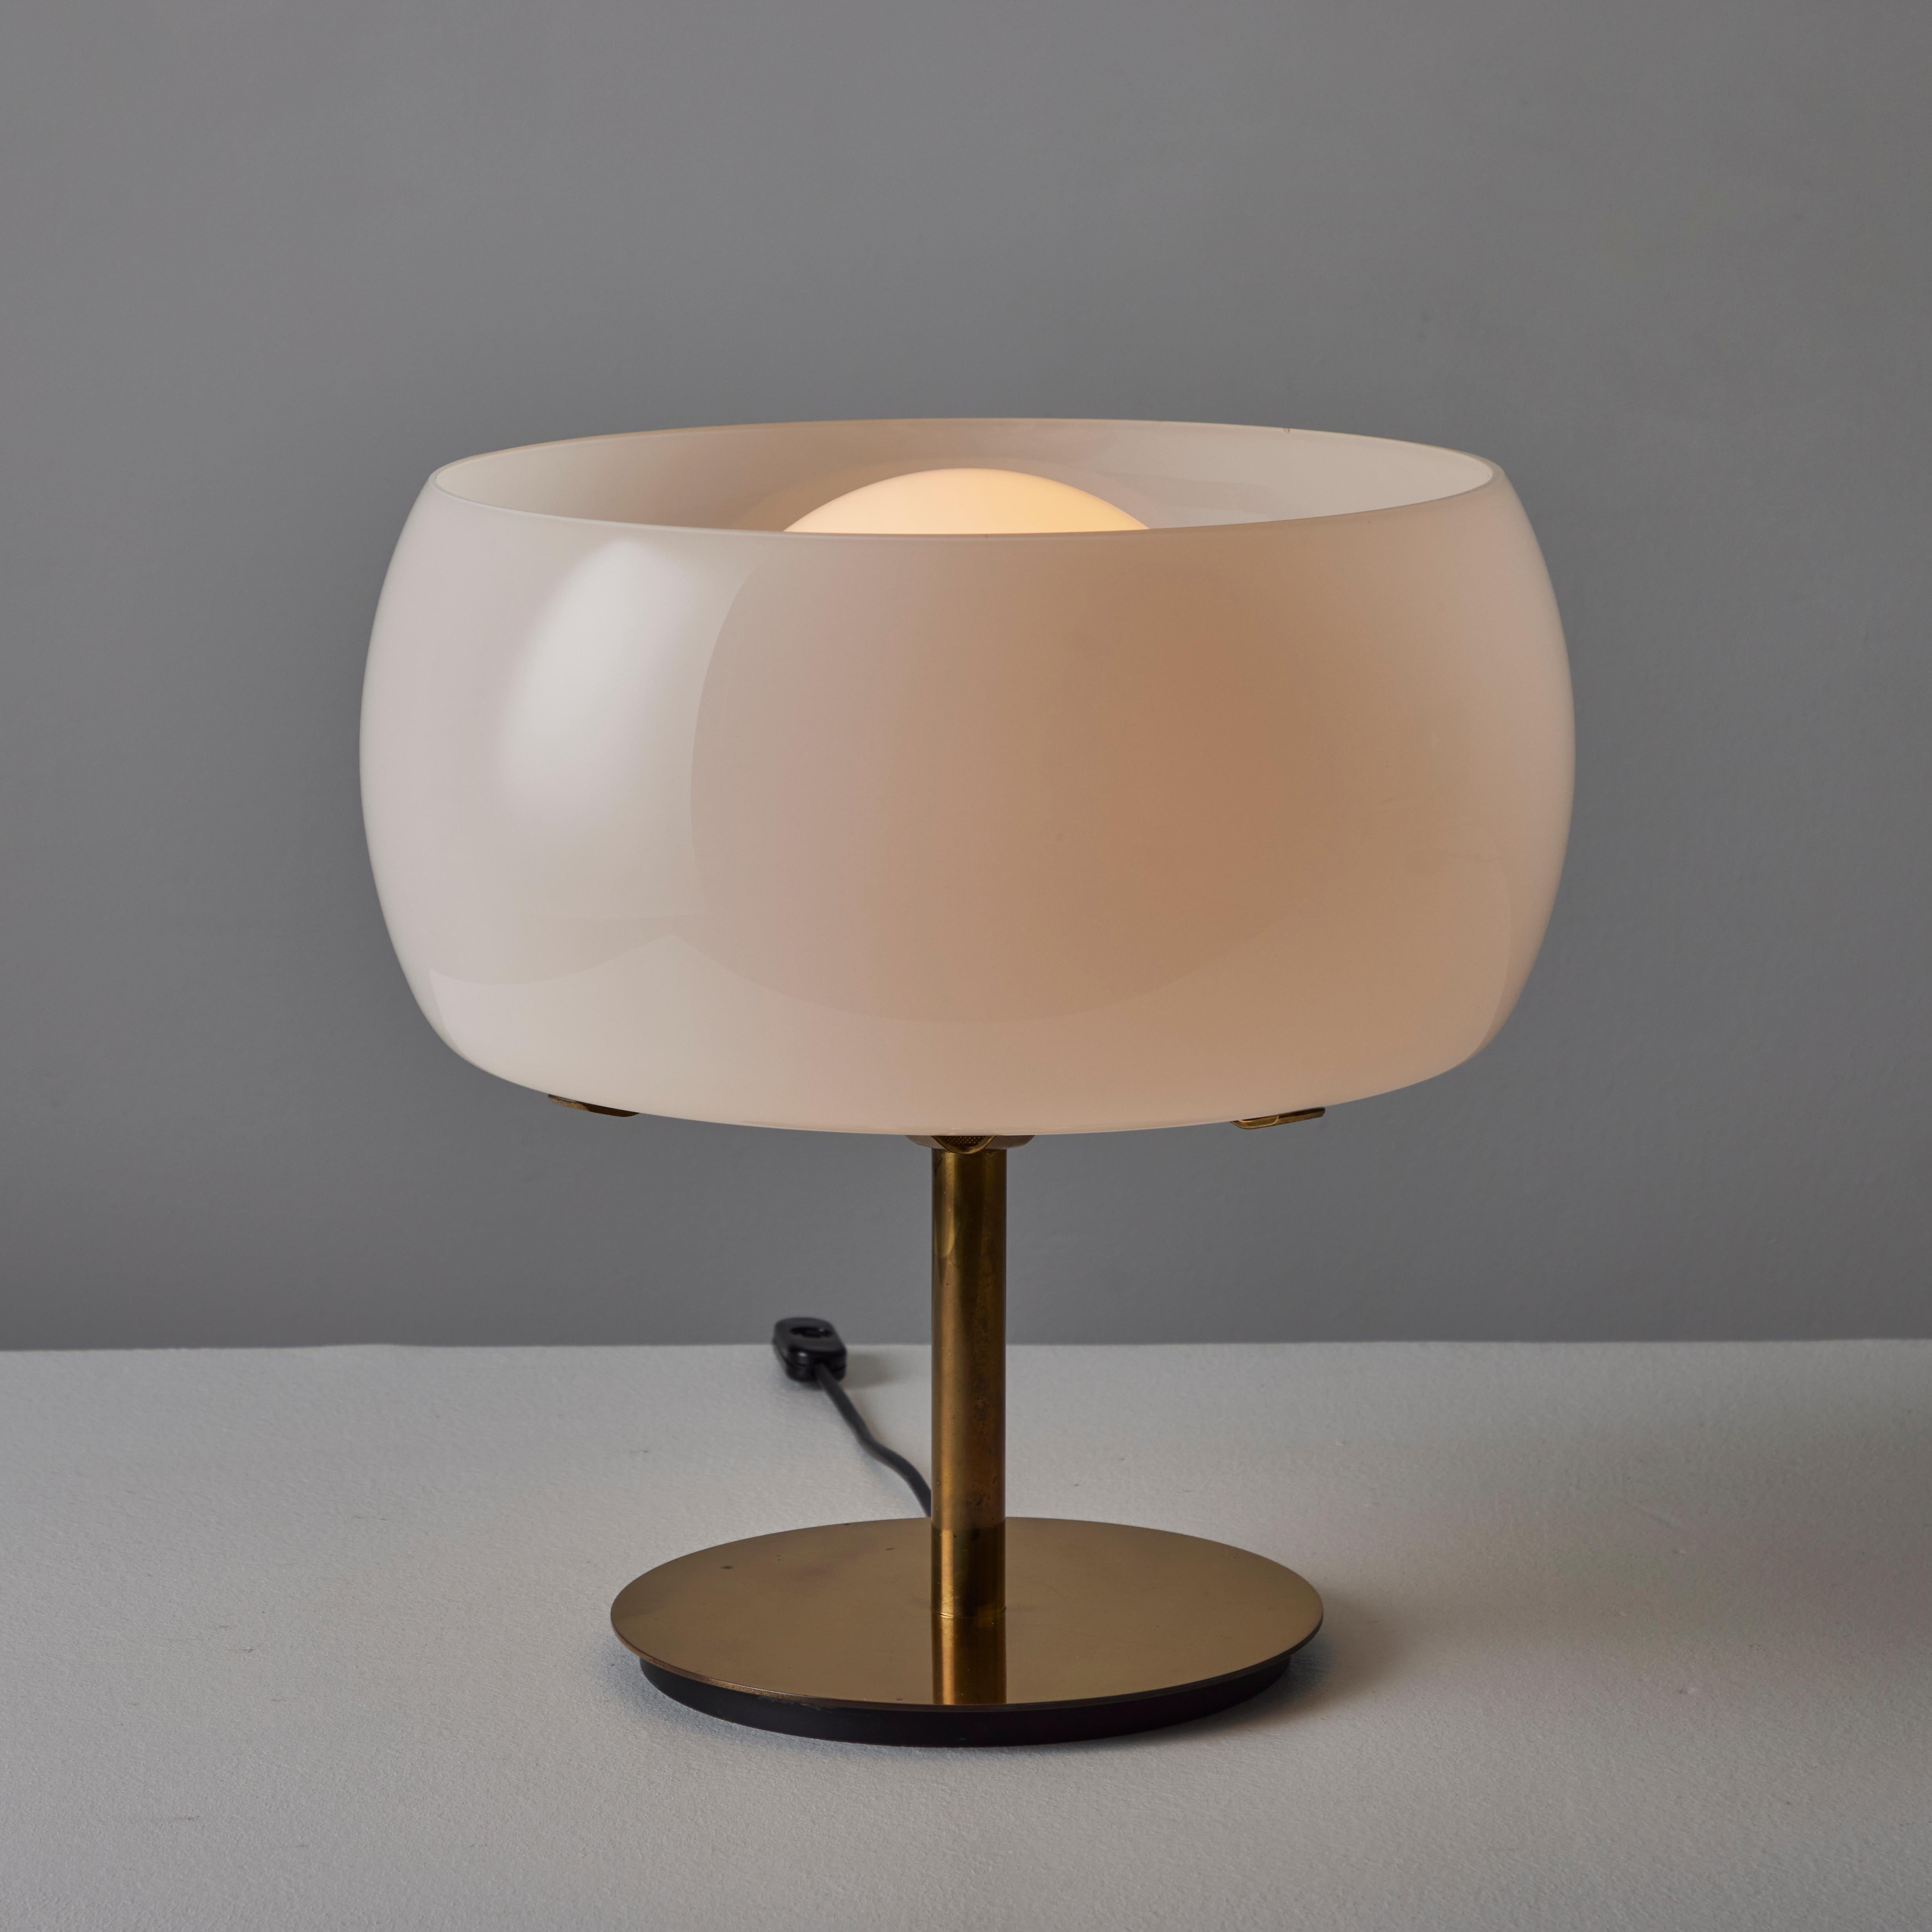 Pair of 'Erse' Table Lamps by Vico Magistretti for Artemide. Designed and manufactured in Italy, 1964. The base and stem of the lamp is constructed of polished brass. External orbital shade is made of white opaline glass which wraps around a frosted